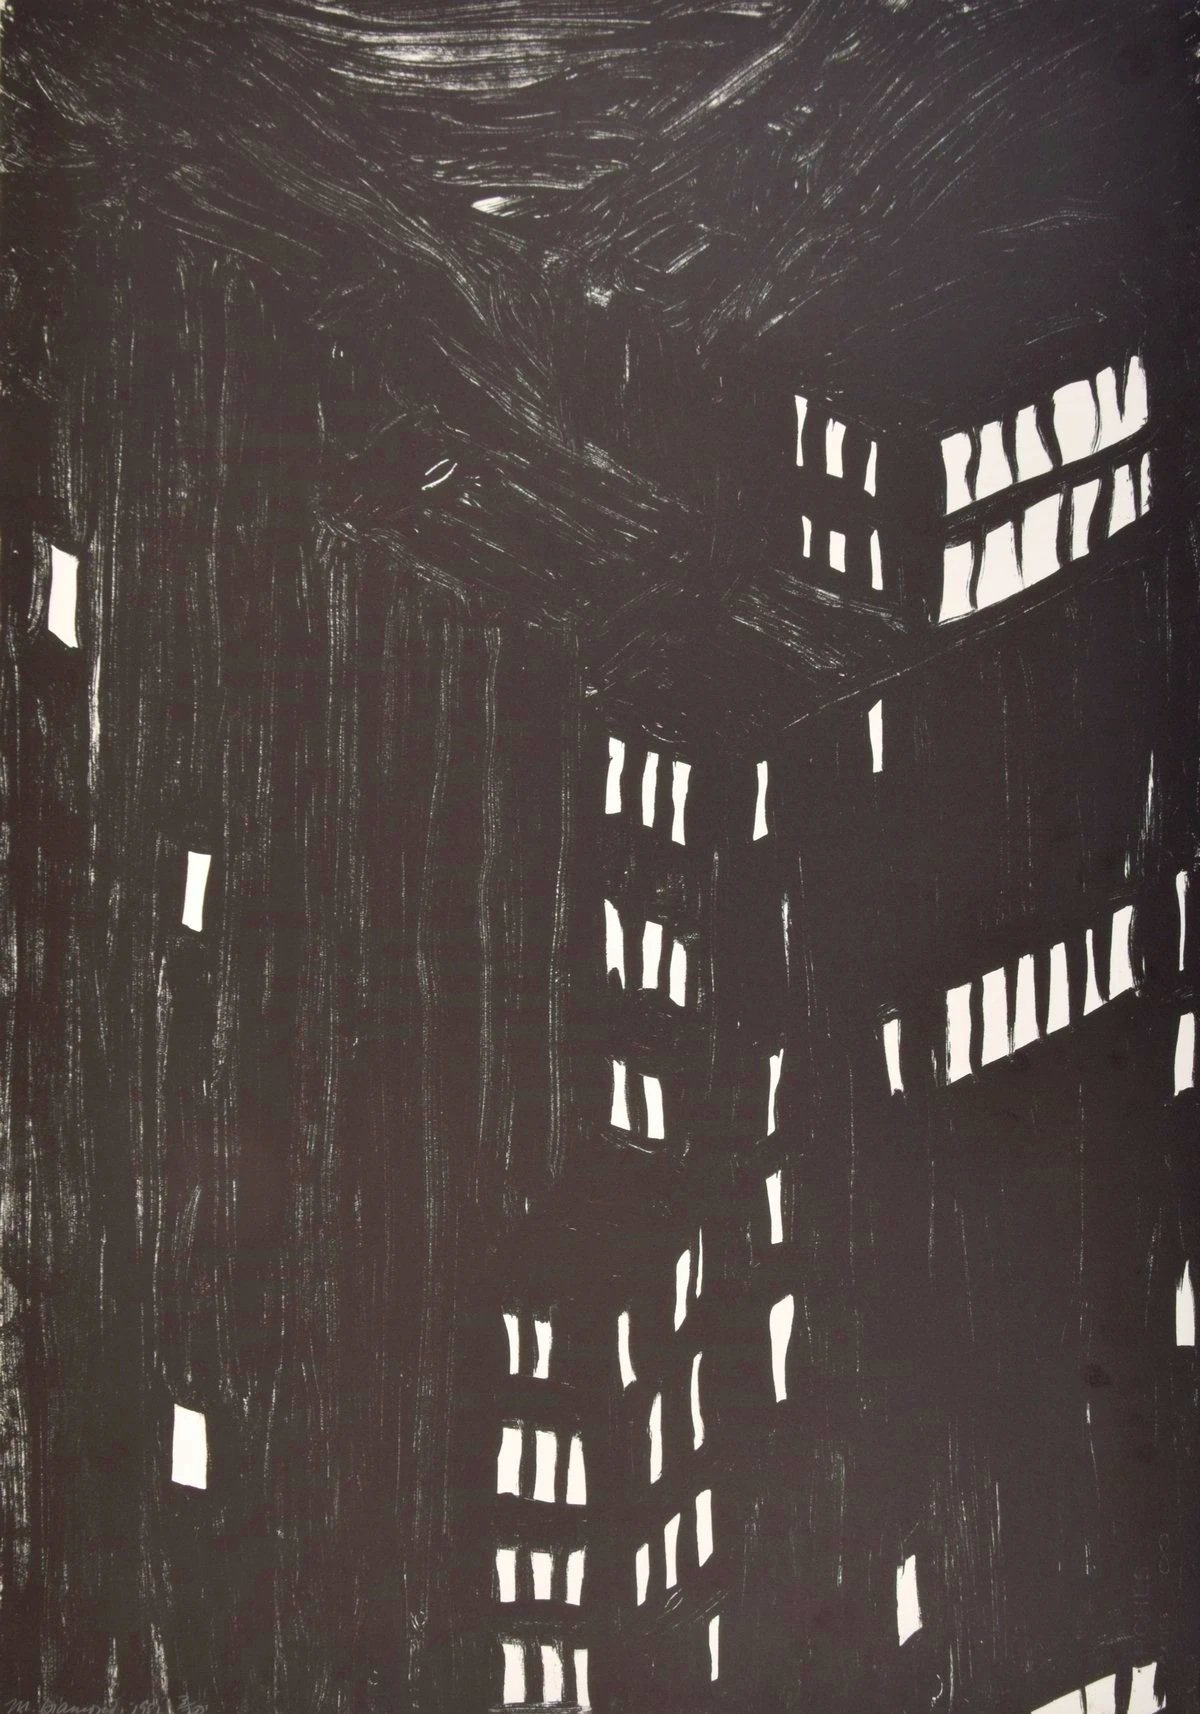   City Suite , 1982. Lithograph, edition of 20. 35.75 x 25 in.  